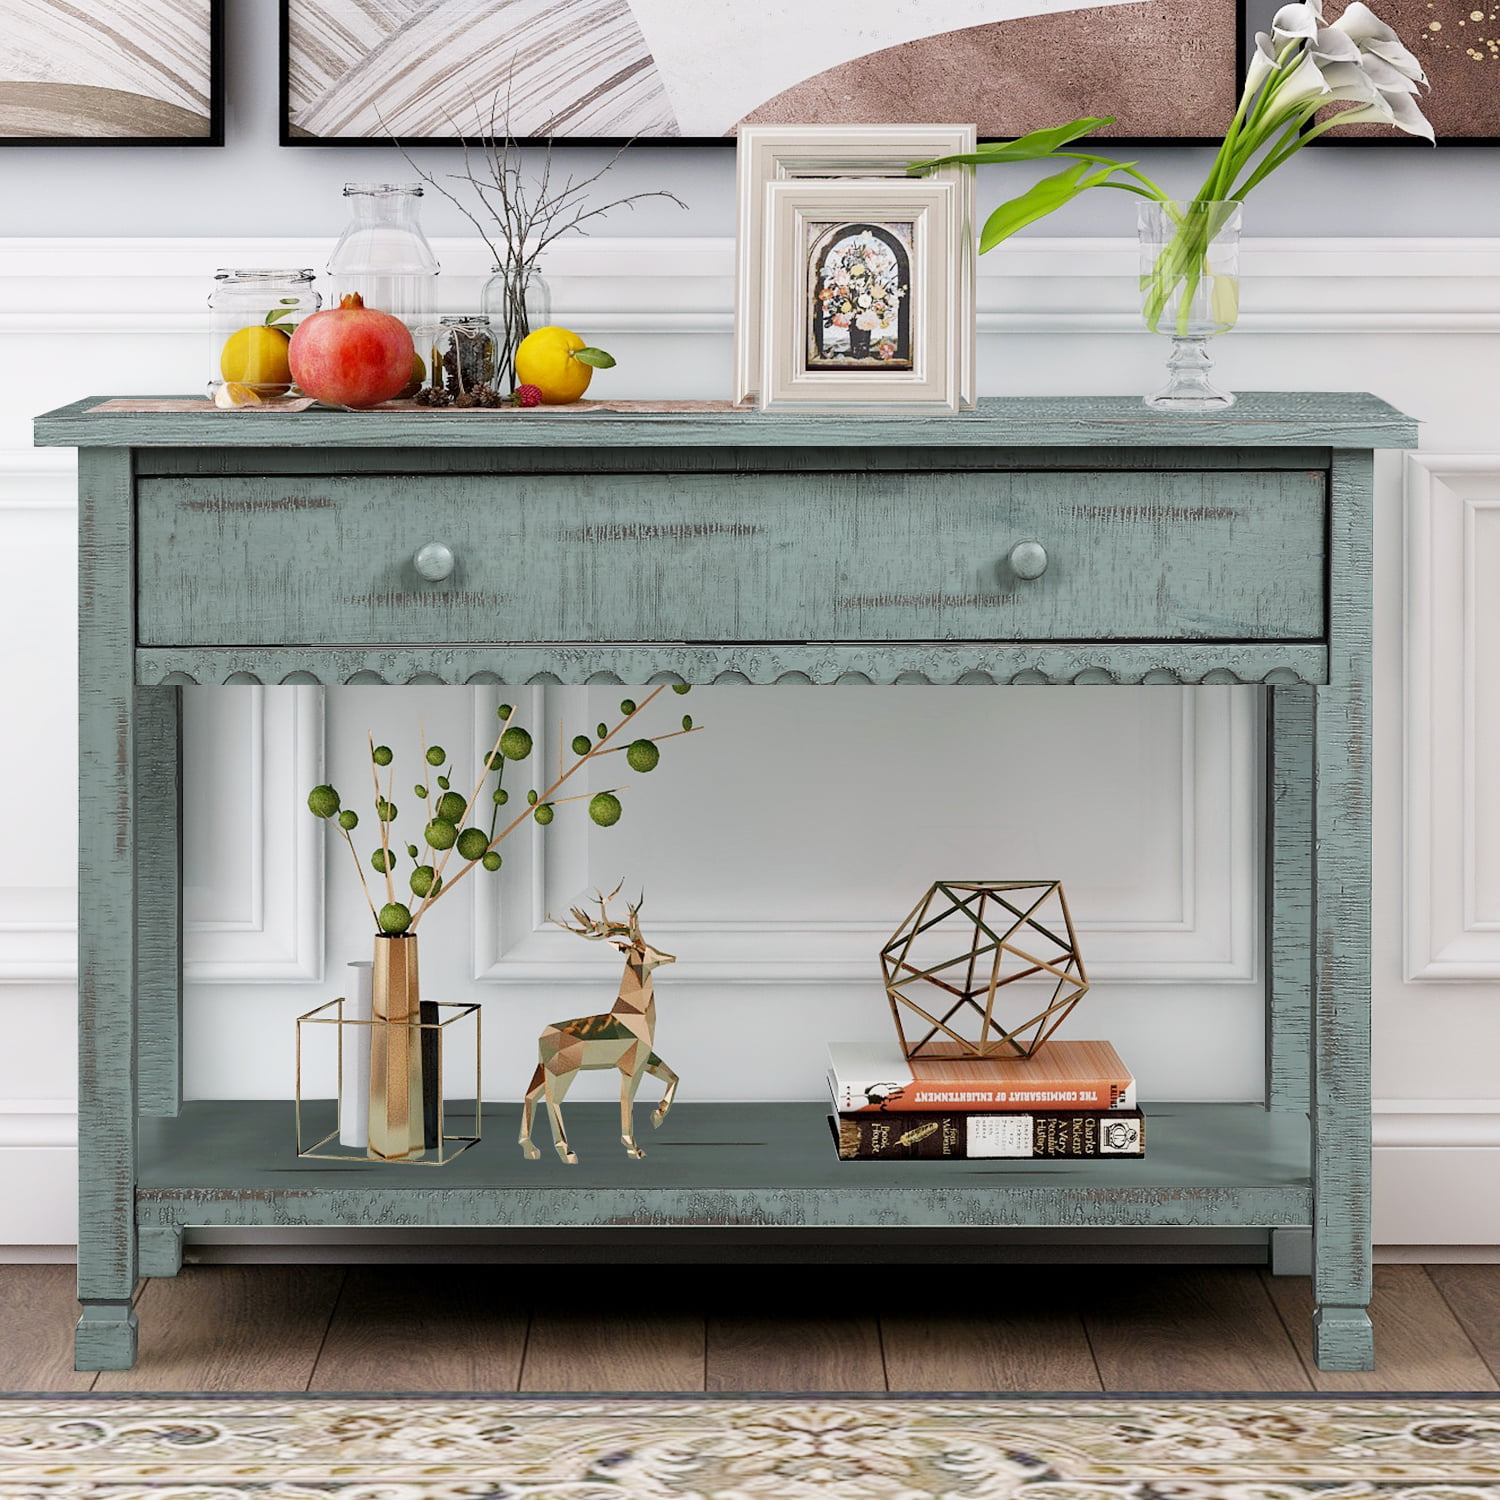 Details about   Wooden Console Table Narrow Sofa Display Shelf Entry Rustic Farmhouse Assembled 